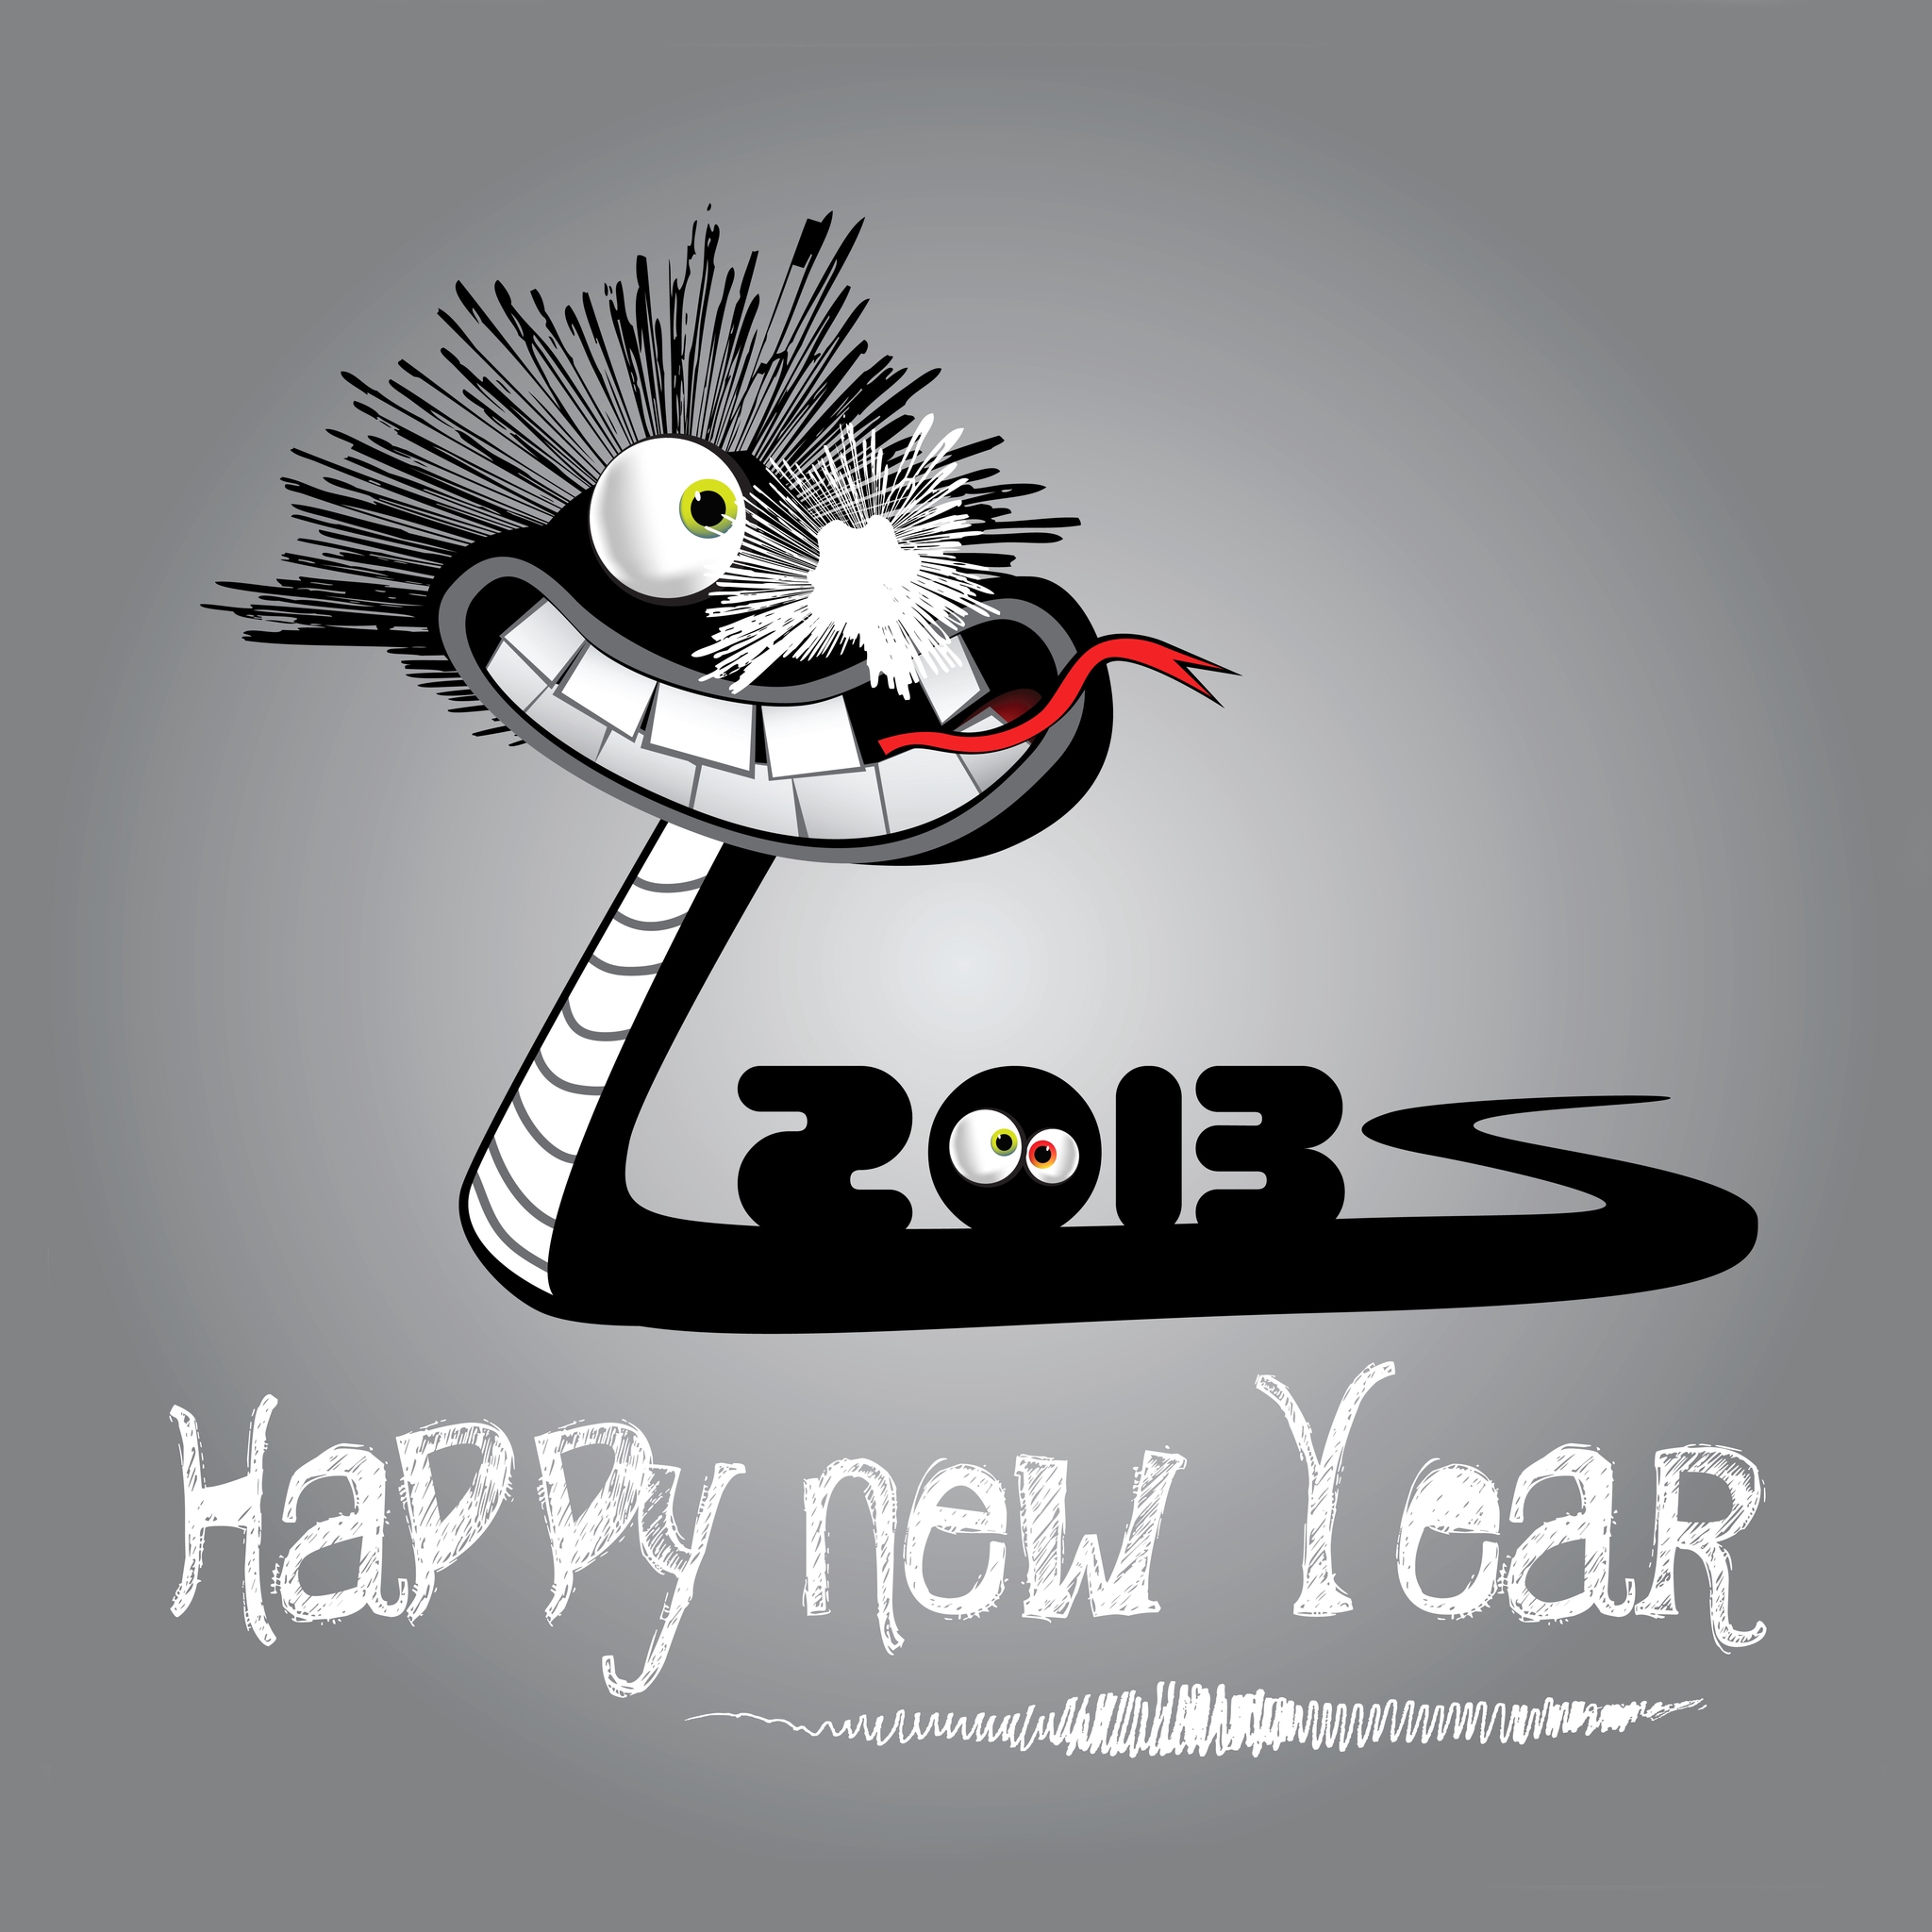 2013 Happy New Year for 2048 x 2048 New iPad resolution